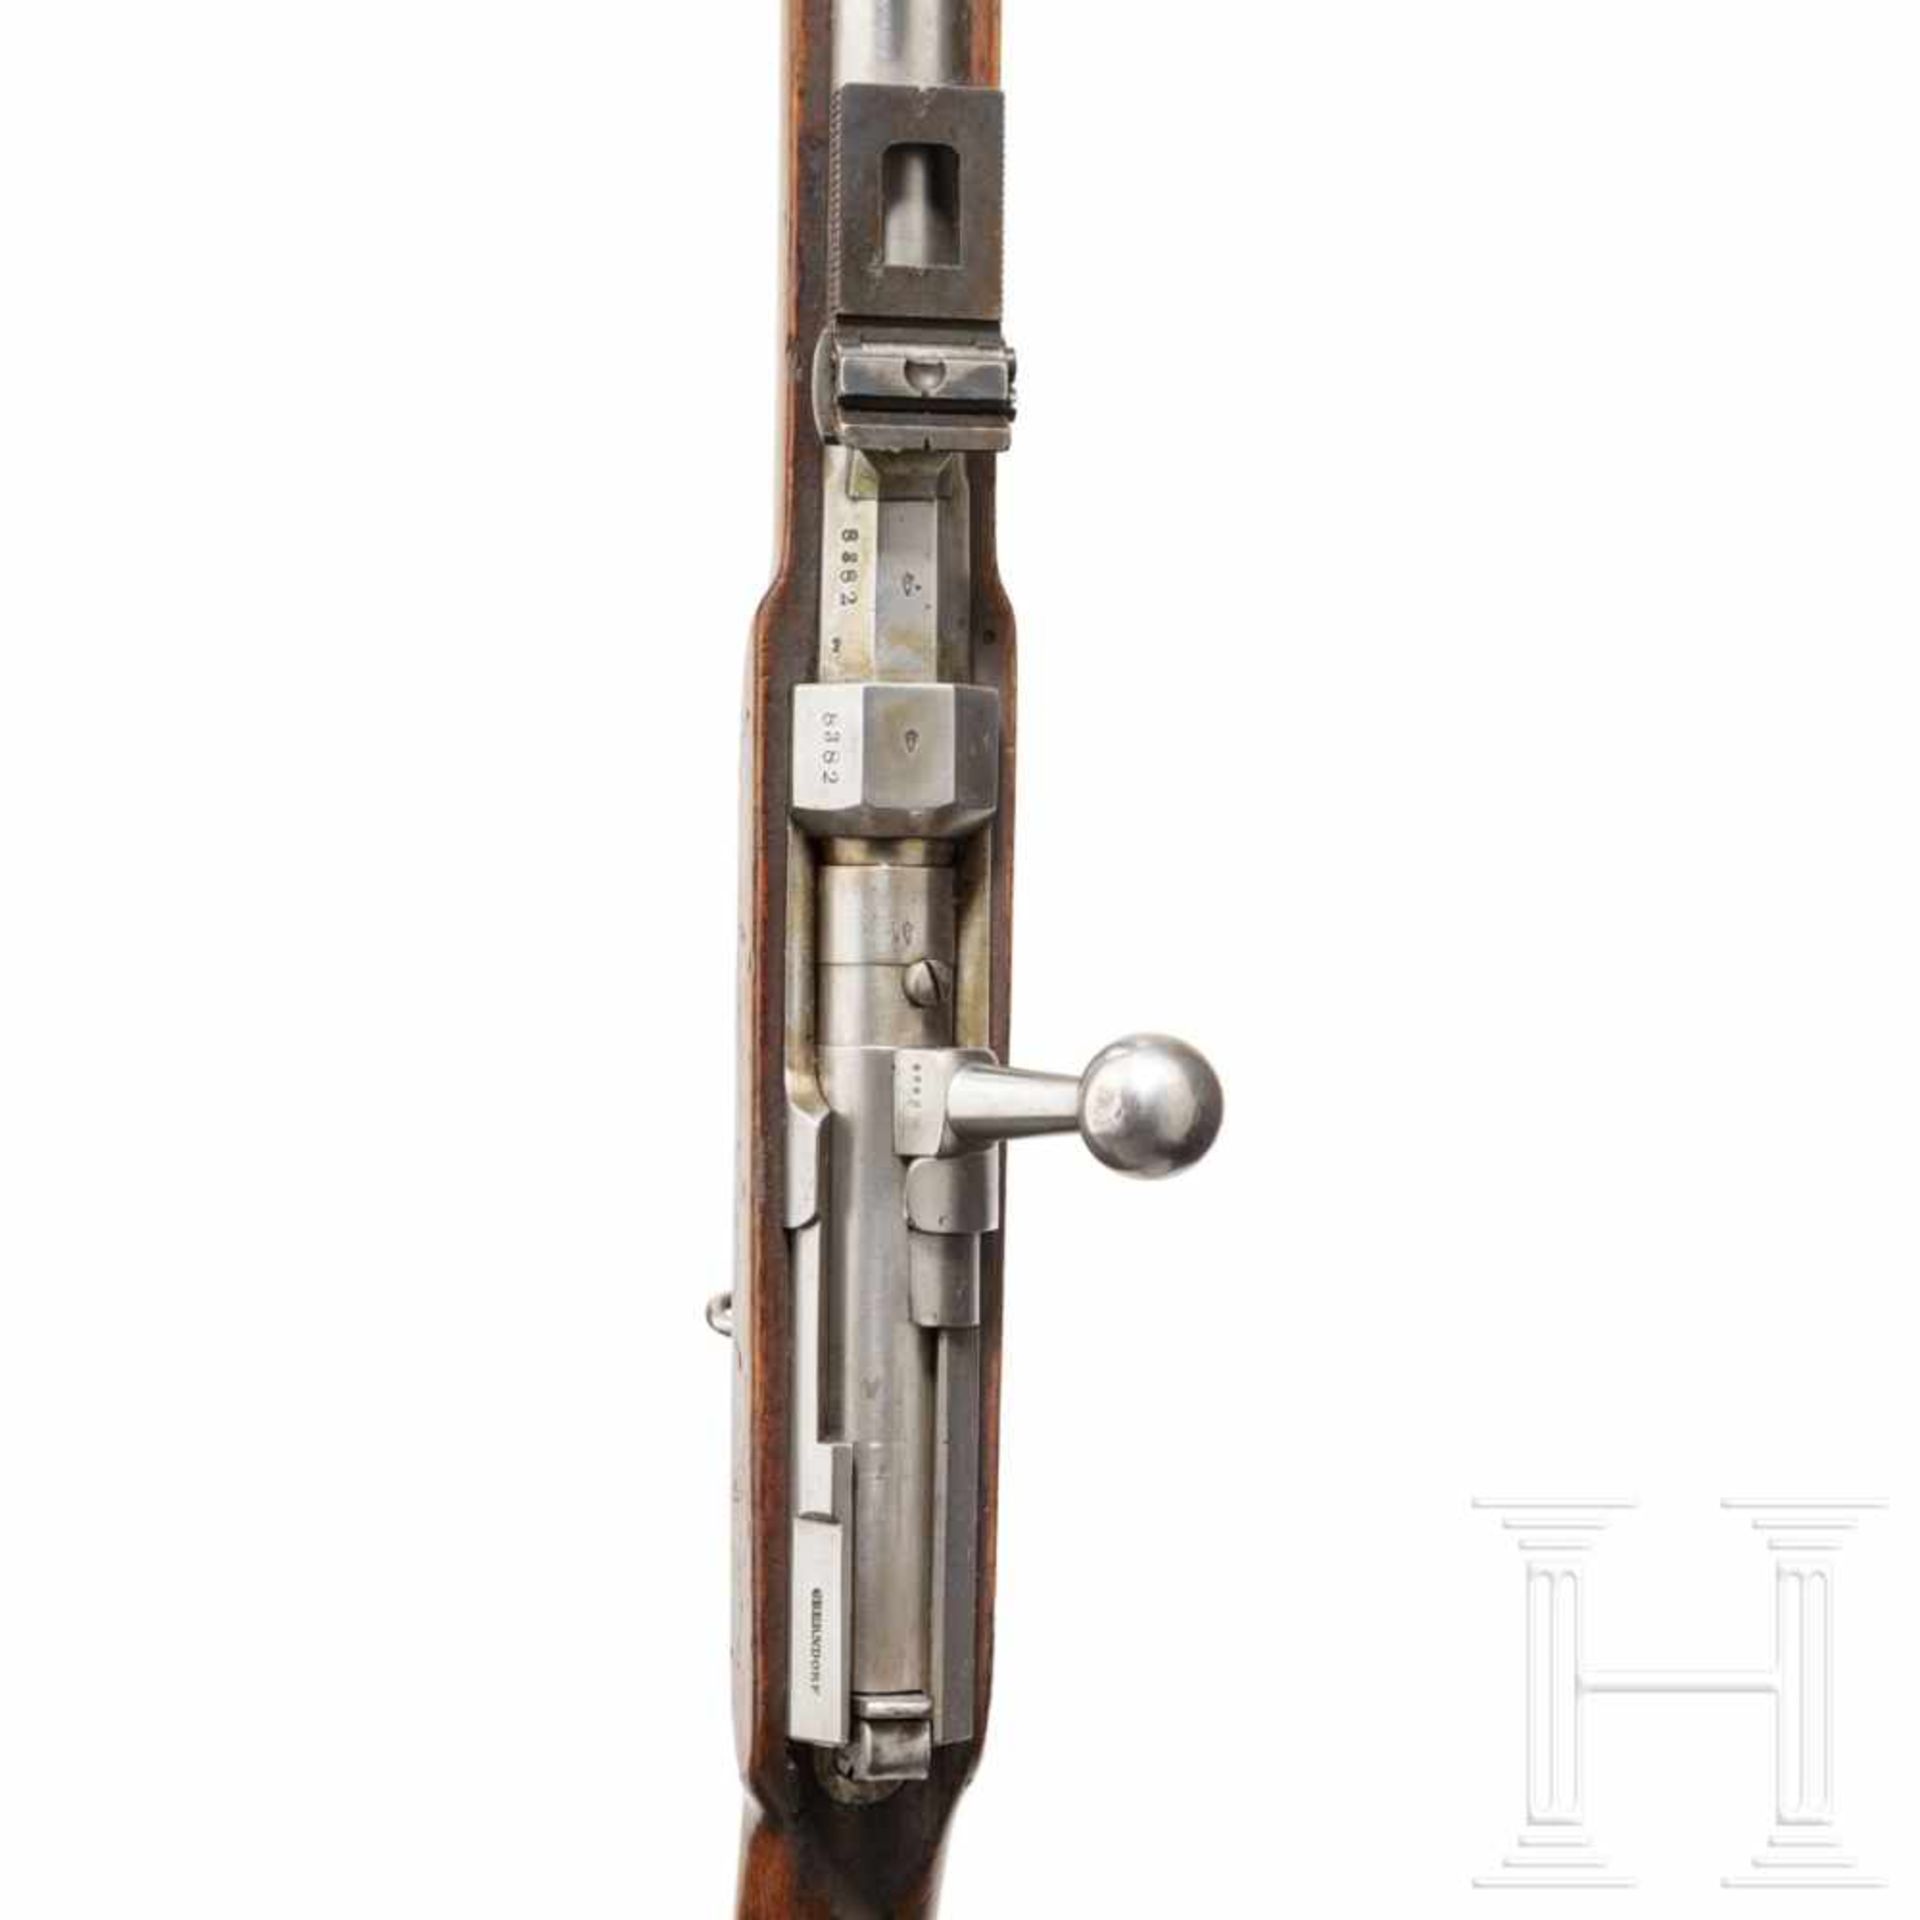 A Württemberg M 1857/67 needle-fire rifle with Beck modificationKal. 15,4 mm, Nr. 8382, - Bild 3 aus 3